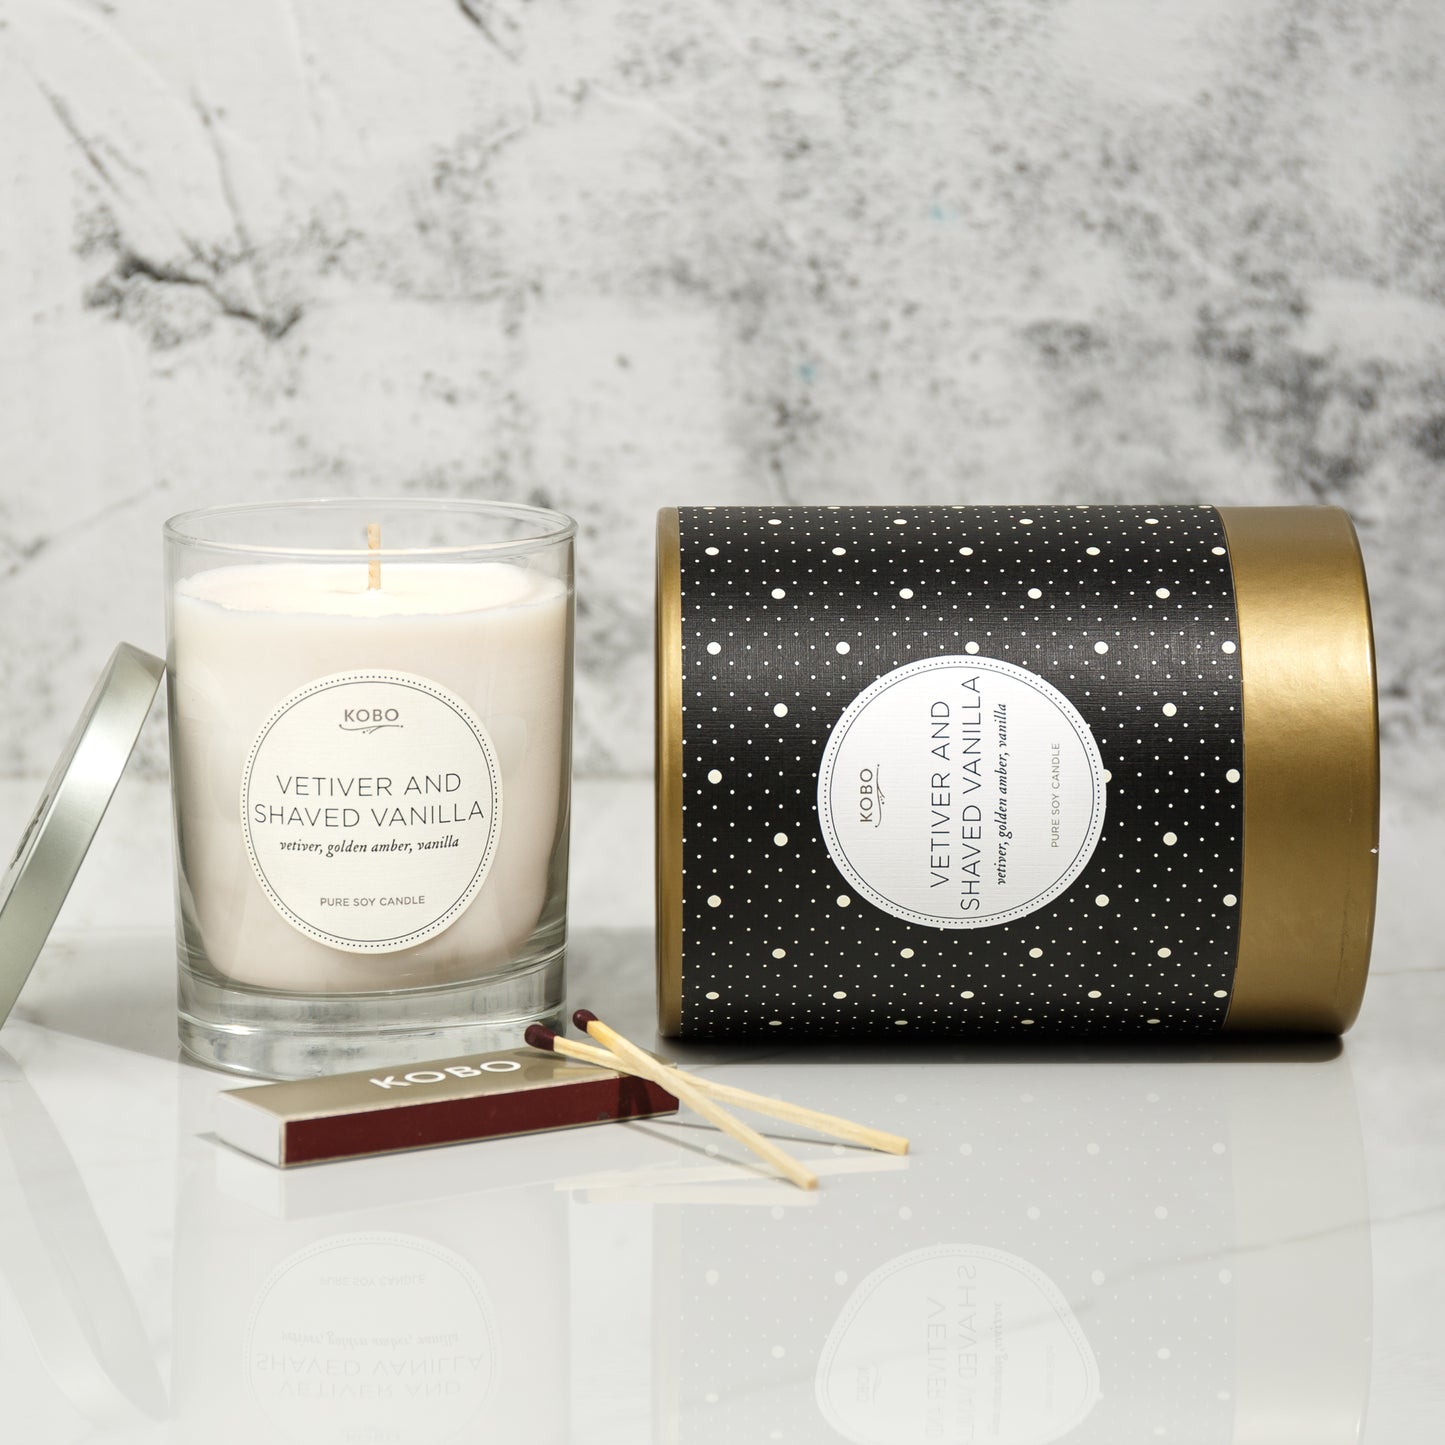 Primary Image of Vetiver + Shaved Vanilla Coterie Candle